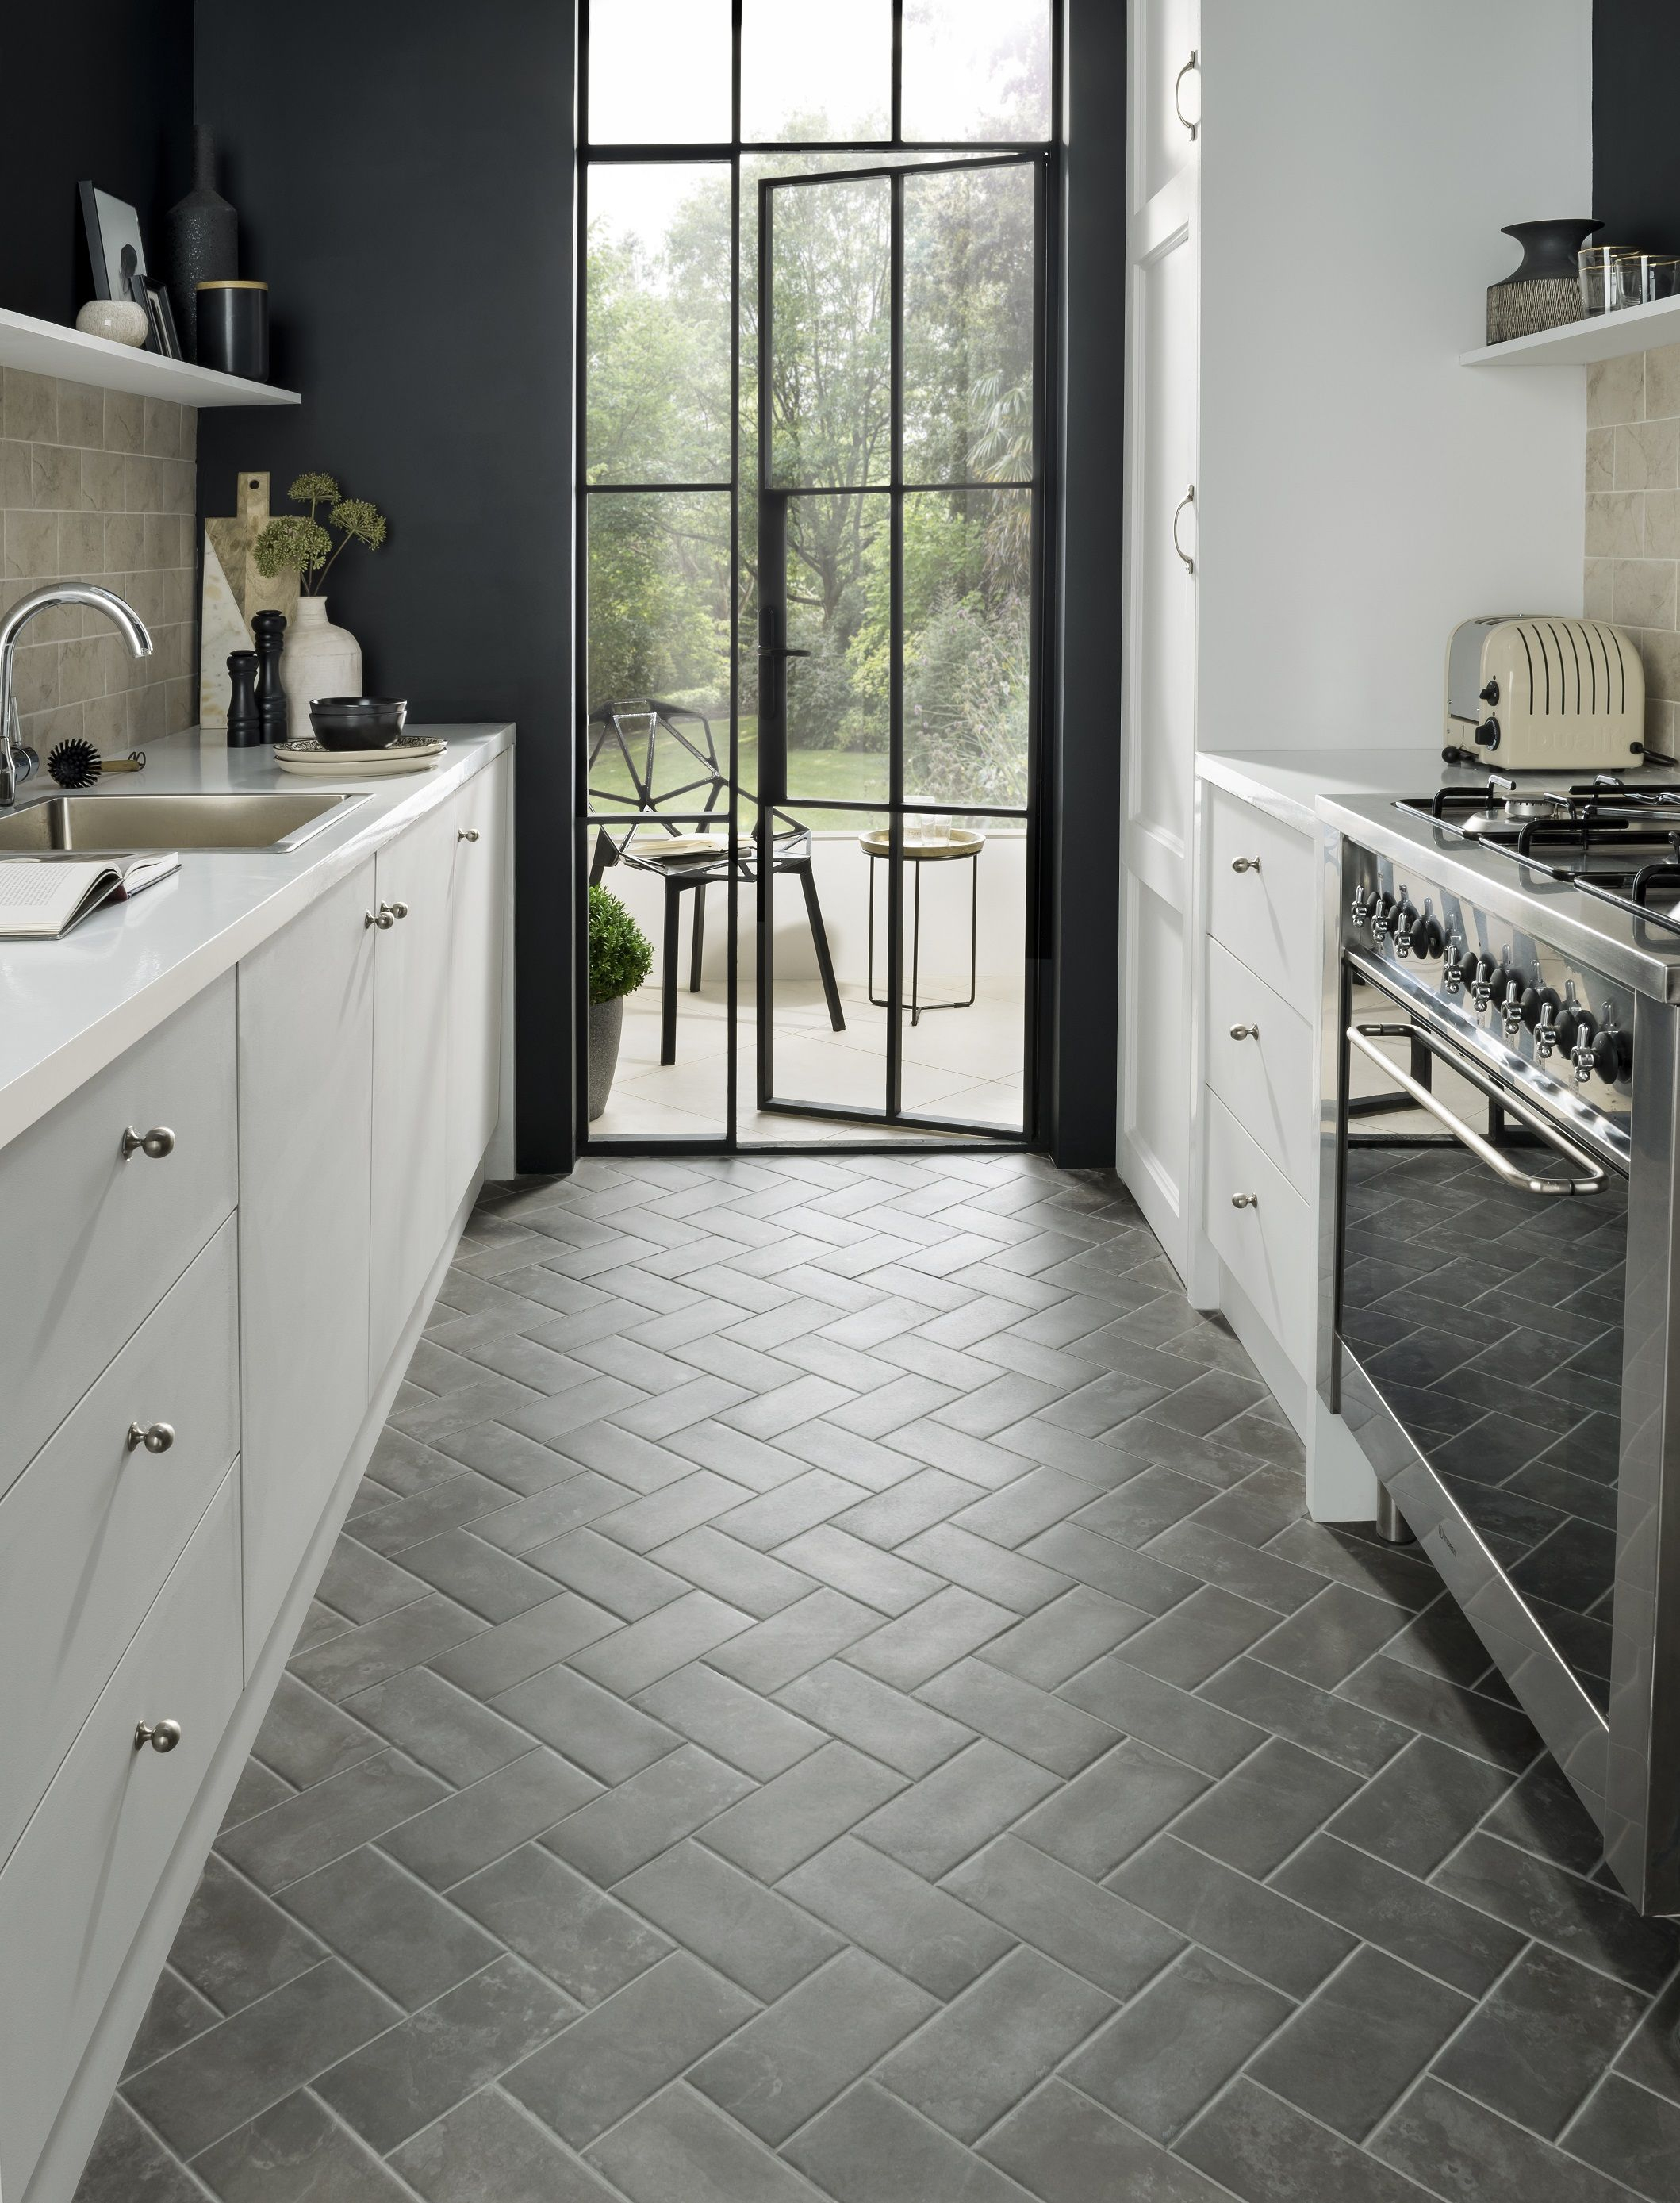 11 Tile Design Ideas To Make A Small Kitchen Feel Bigger with measurements 2118 X 2777